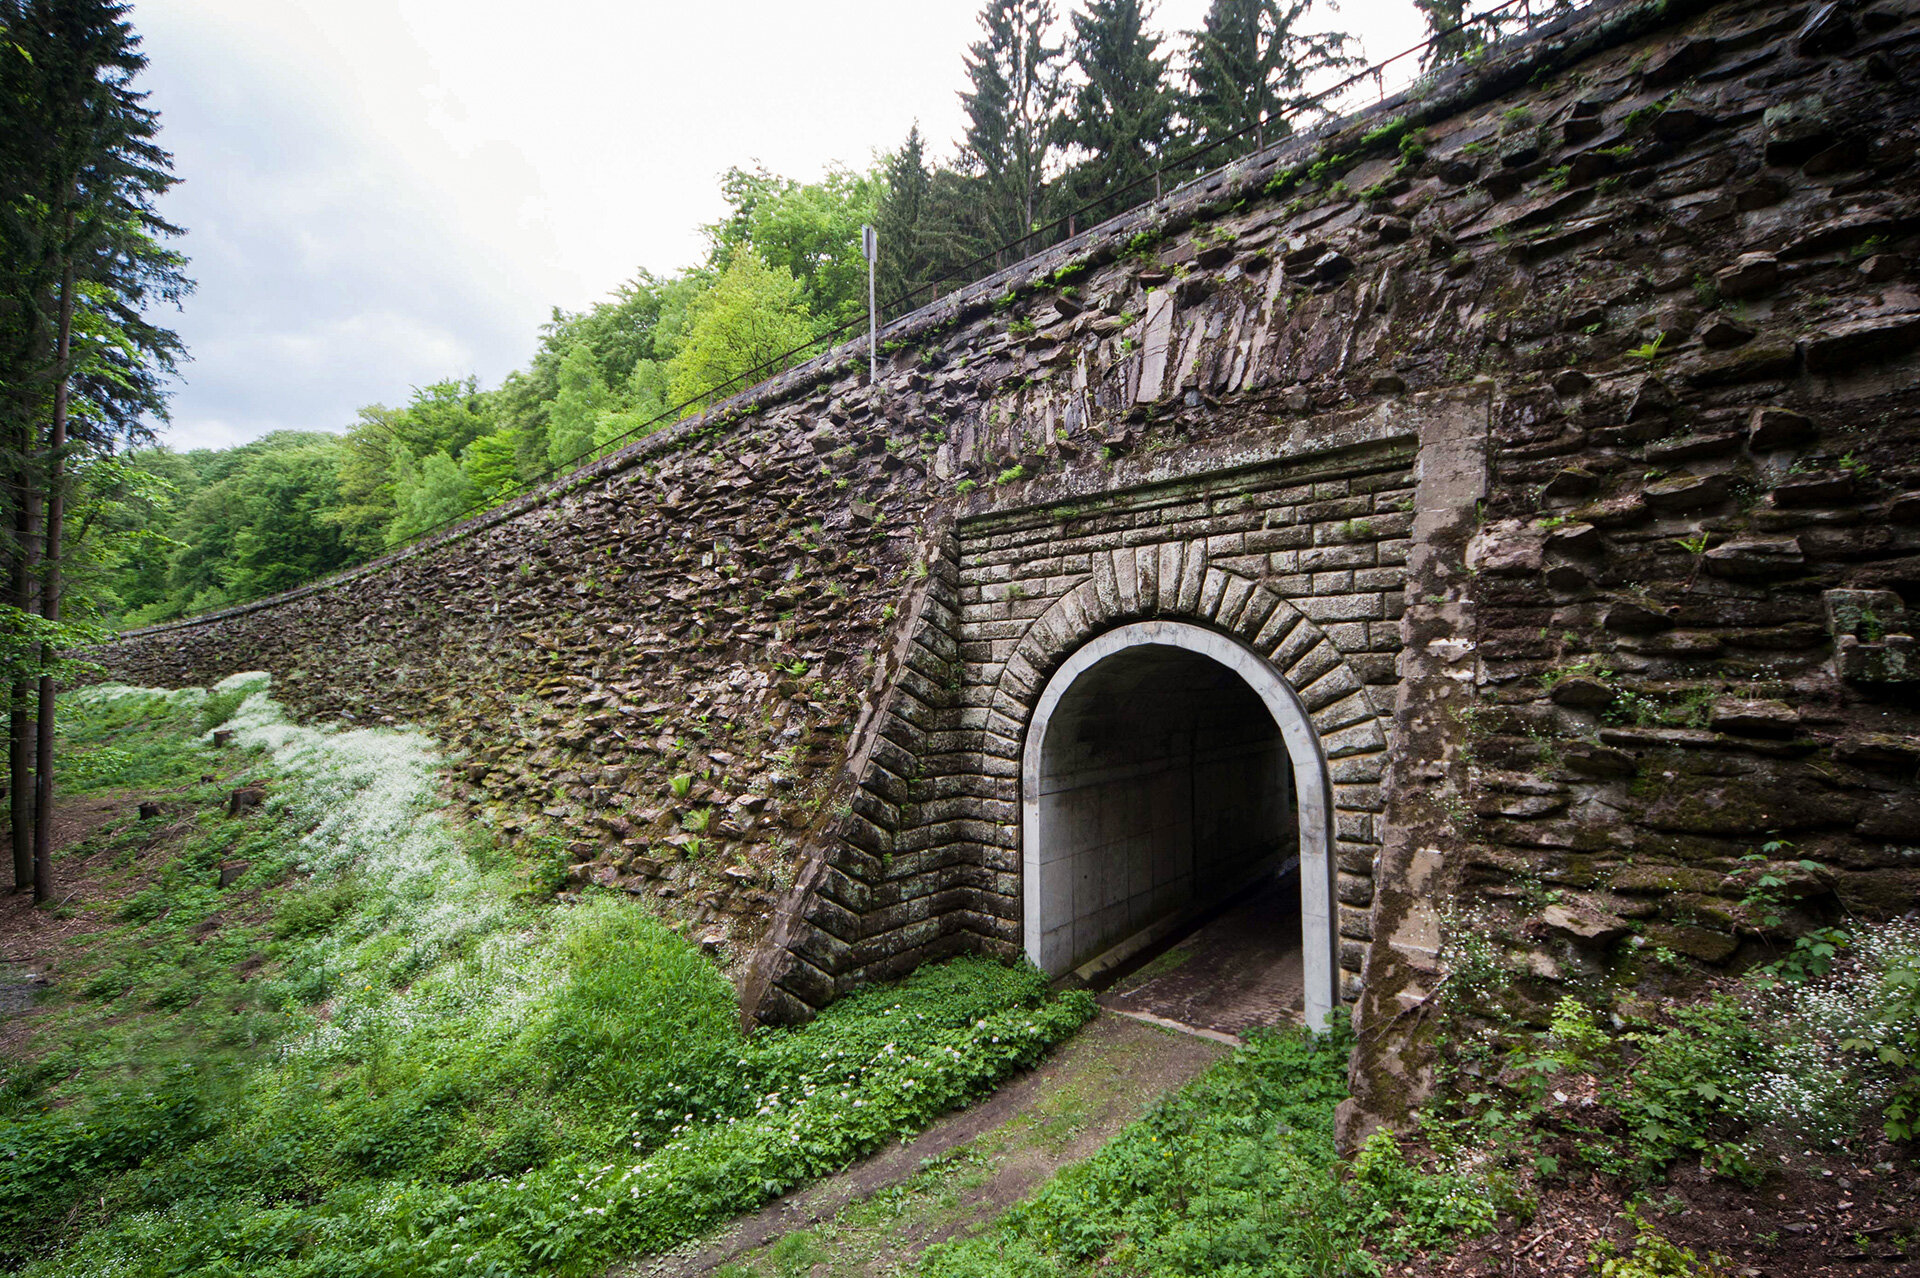 A passage leads under the railway track of the Schiefe Ebene